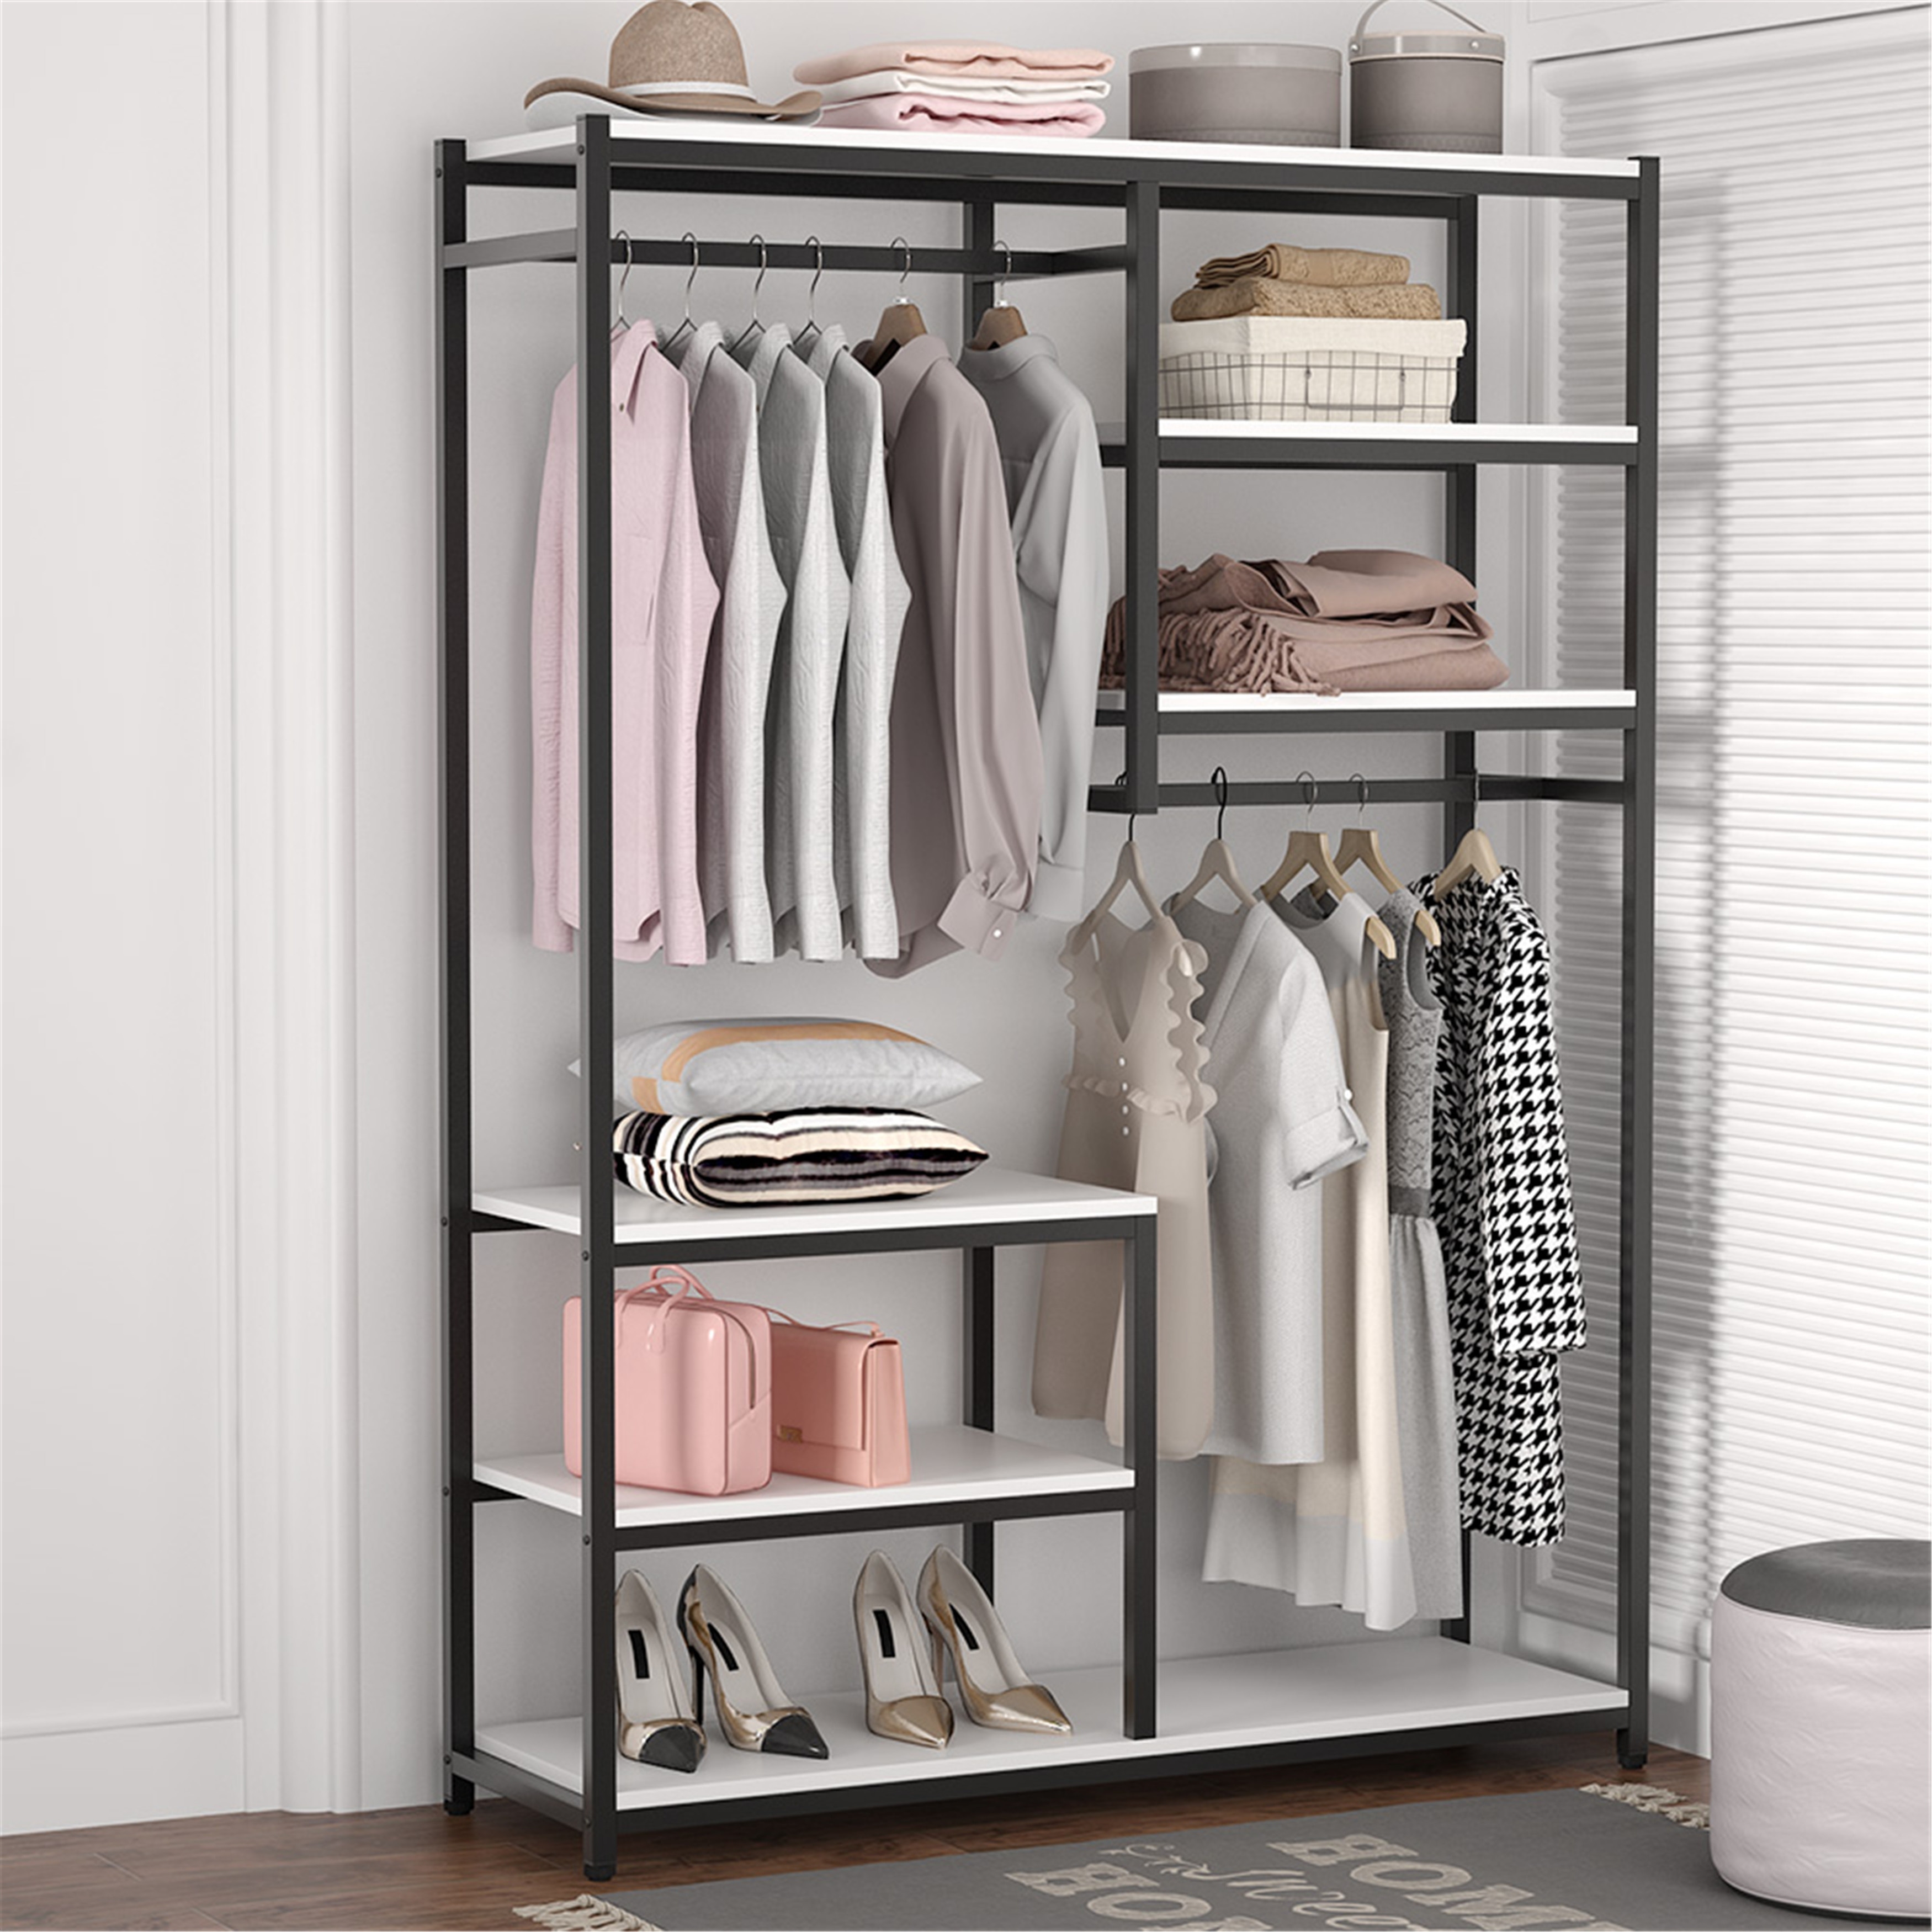 https://ak1.ostkcdn.com/images/products/is/images/direct/d2e3d5835f7737c7643d13b98cada1eb8a91e737/Free-Standing-Closet-Organizer-Double-Hanging-Rod-Clothes-Garment-Racks.jpg